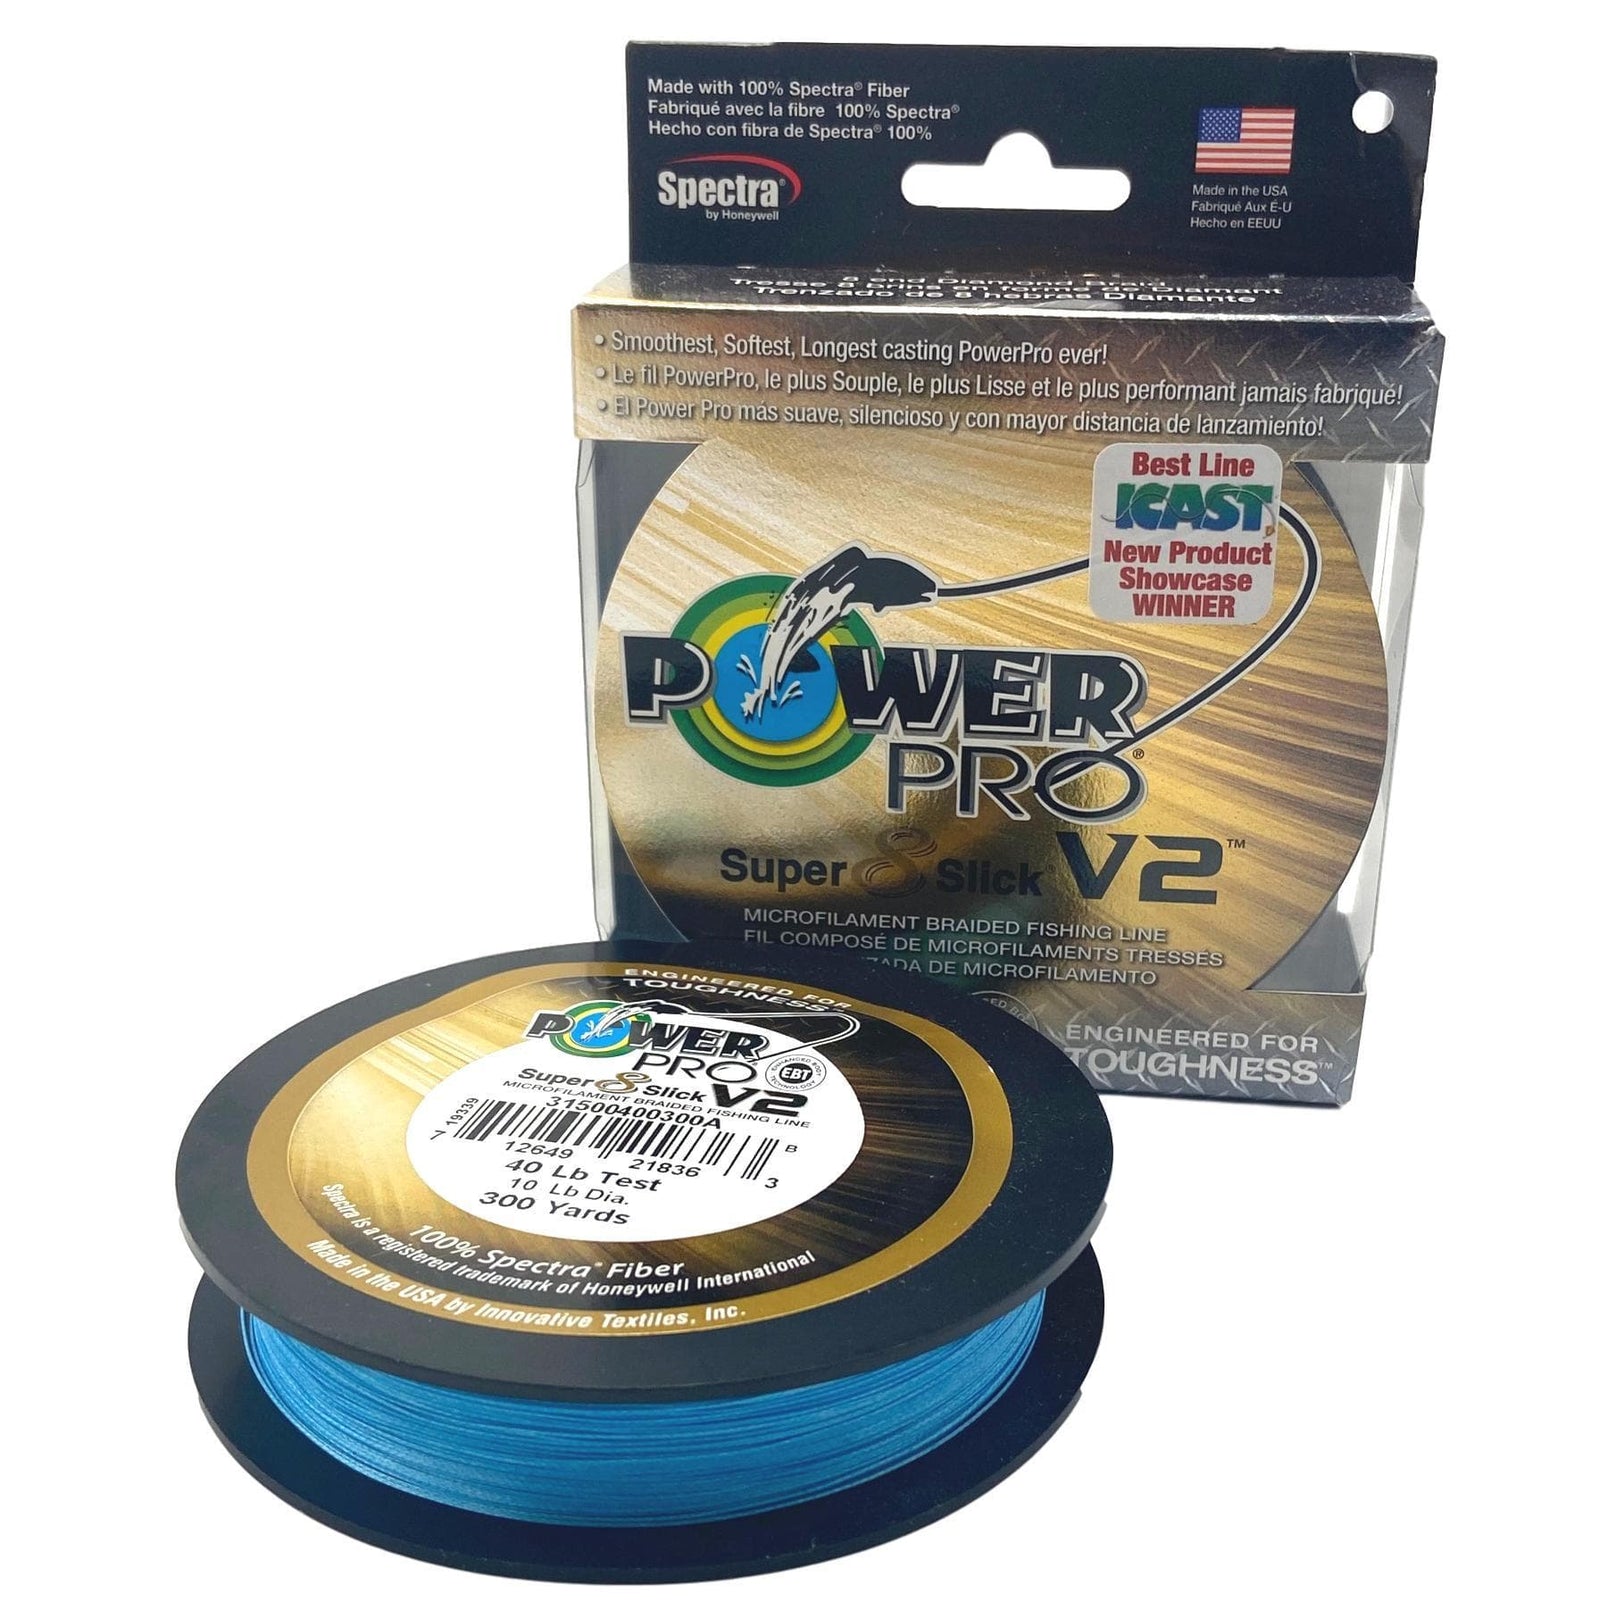 Braided Fishing Line Tagged braided-fishing-line - The Saltwater